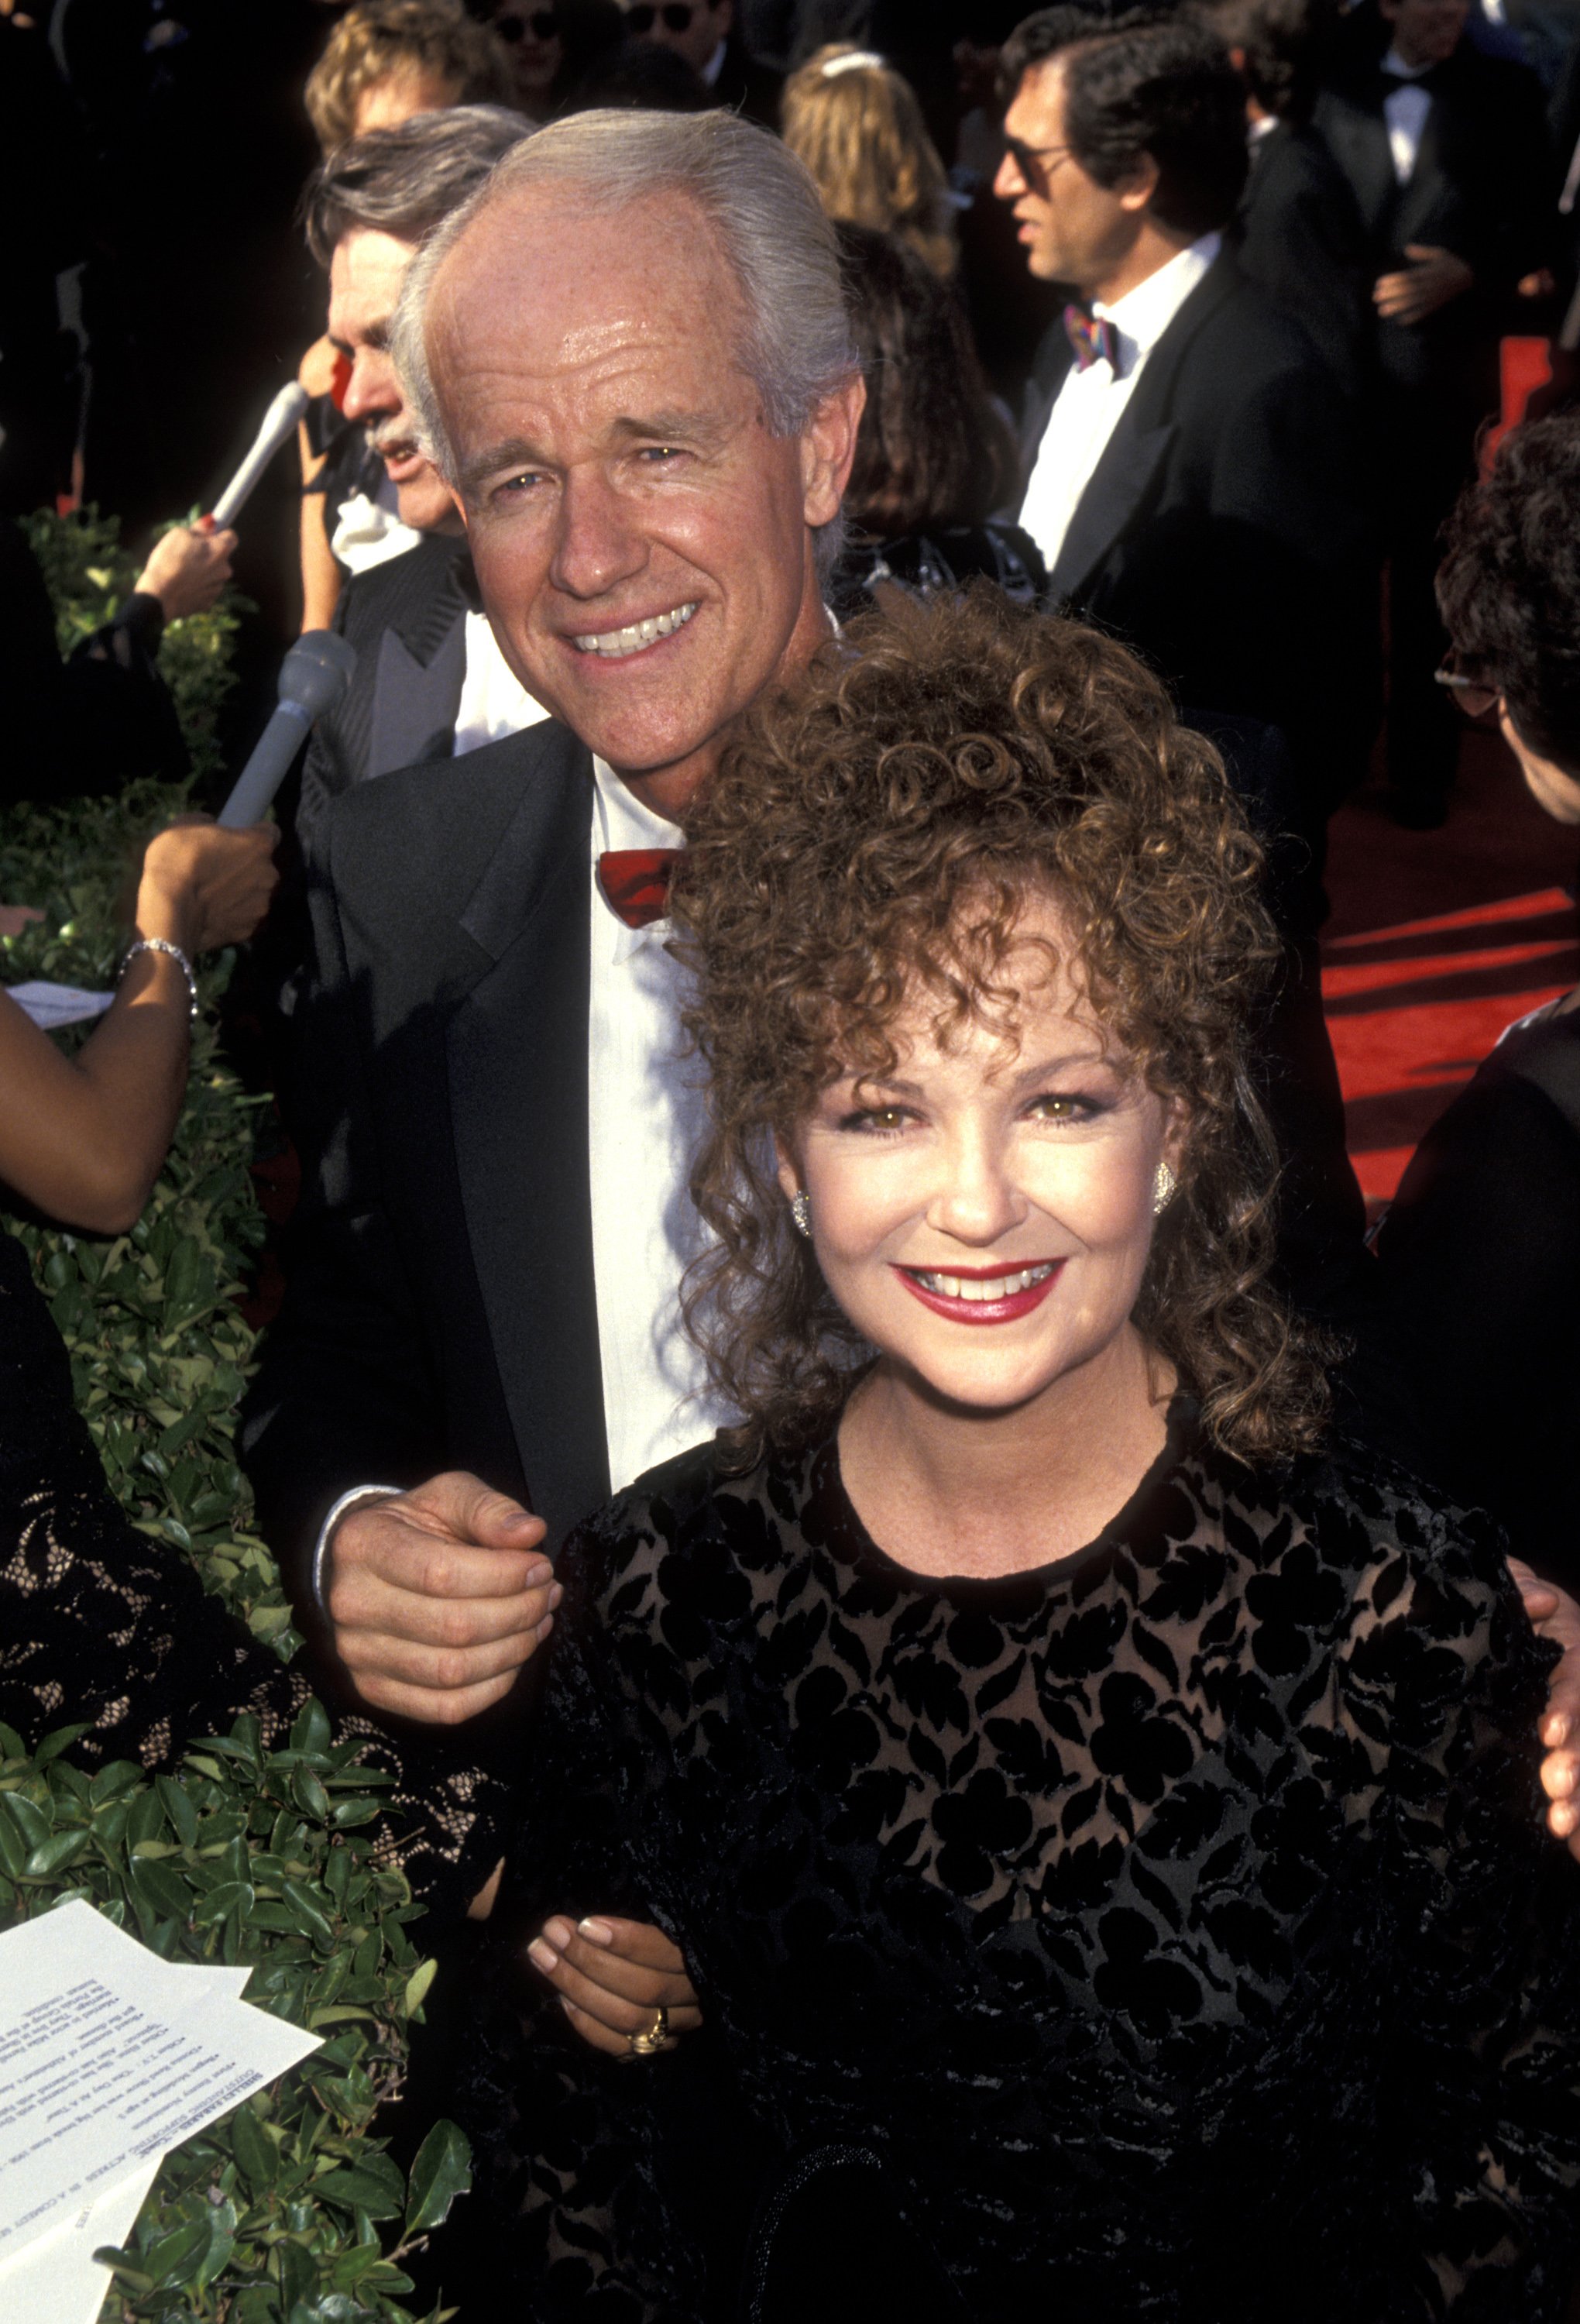 Shelley Fabares and Mike Farrell attend the 45th Annual Primetime Emmy Awards at the Pasadena Civic Auditorium on September 19, 1993 in Pasadena, California. | Source: Getty Images